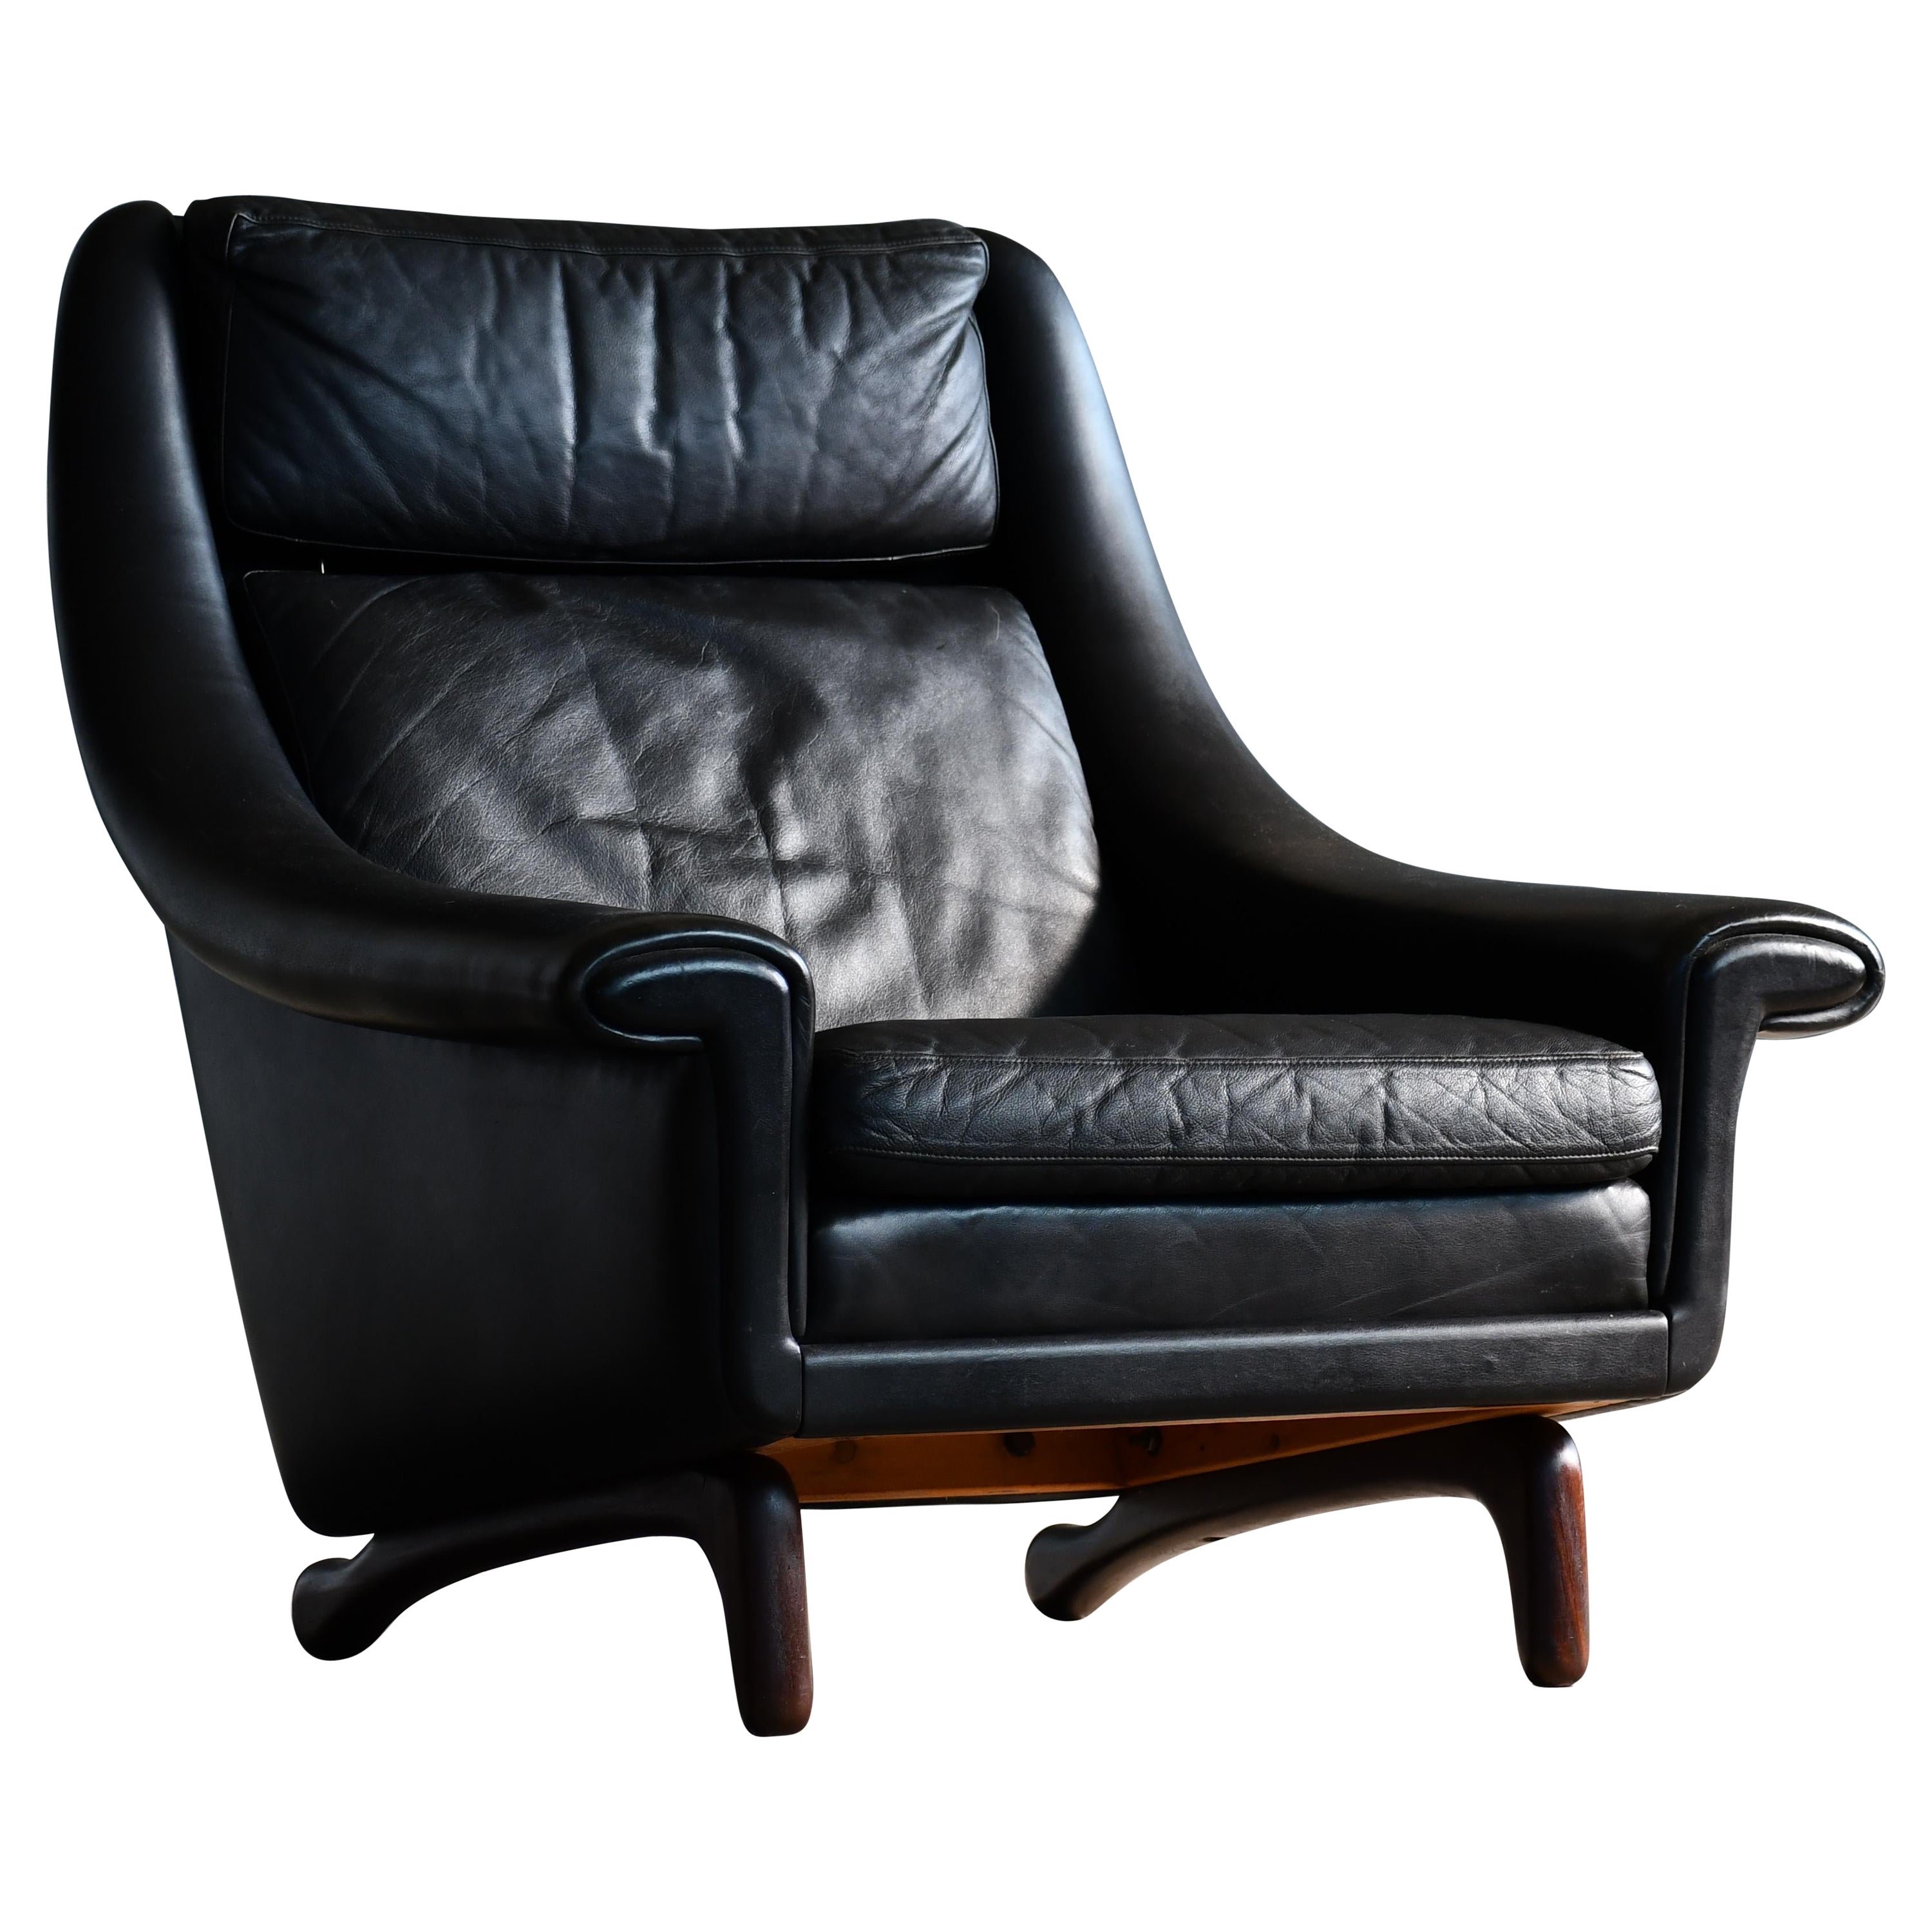 1960s Easy Lounge Chairs Model Matador in Black Leather and Teak Base (V)